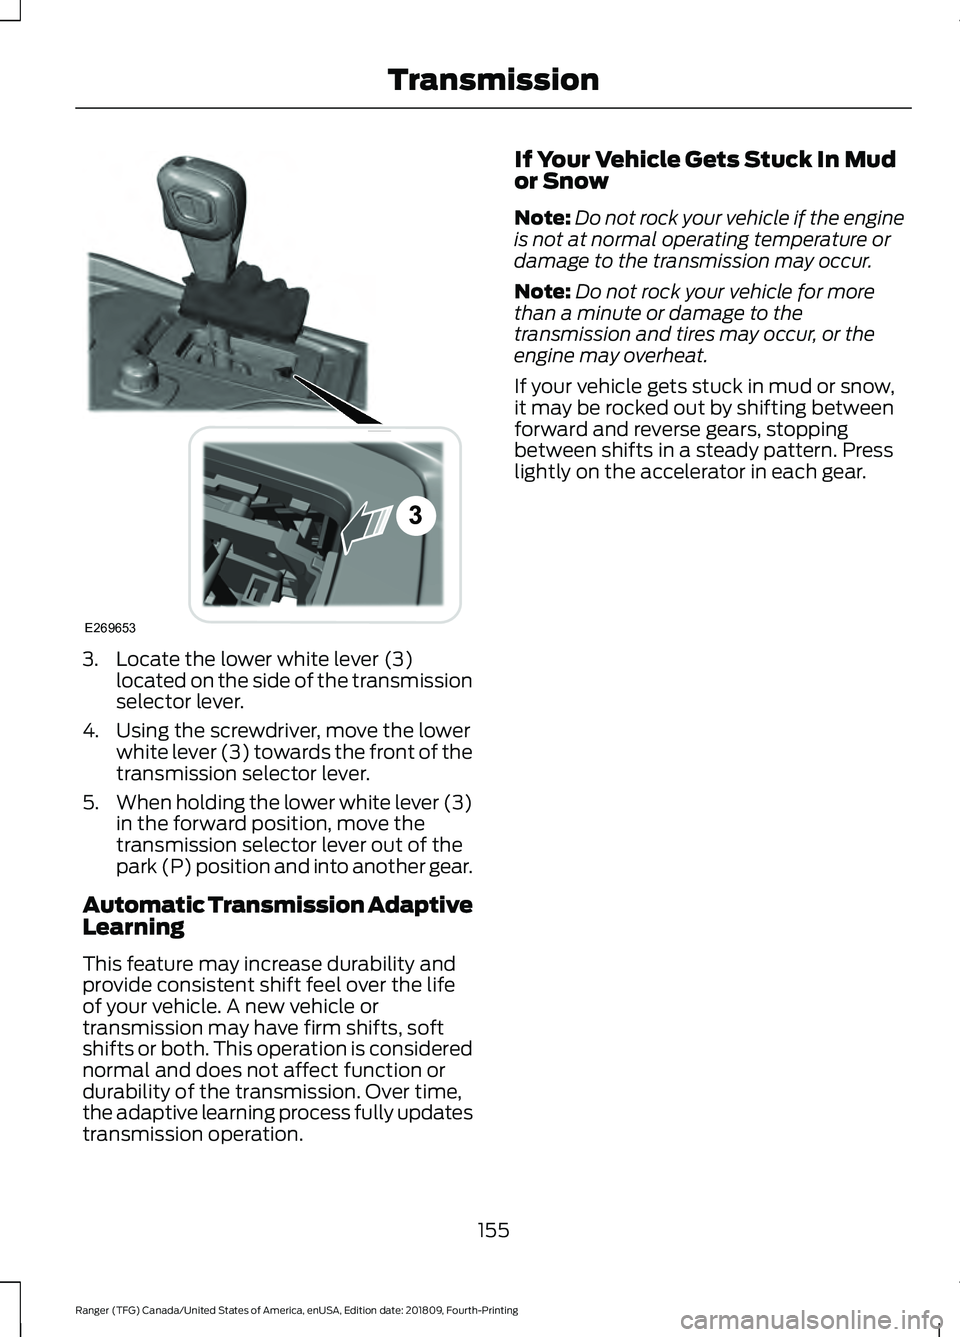 FORD RANGER 2019  Owners Manual 3. Locate the lower white lever (3)
located on the side of the transmission
selector lever.
4. Using the screwdriver, move the lower white lever (3) towards the front of the
transmission selector leve